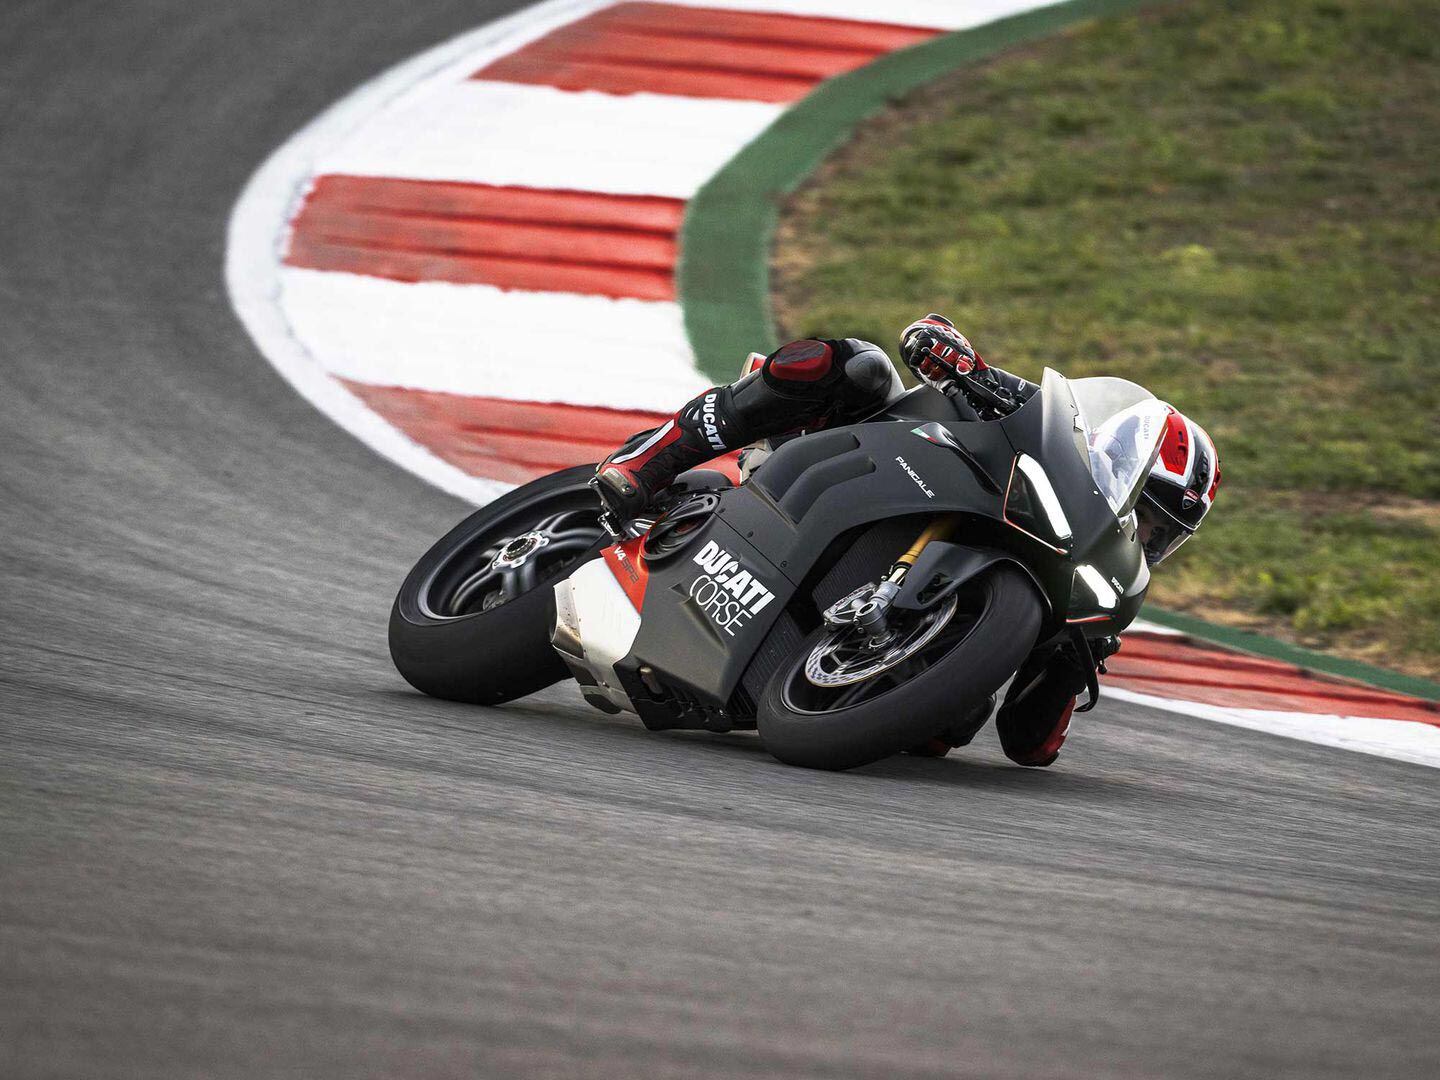 There was a time when stiff suspension with short travel was thought to be the key to going fast. Now, modern superbikes have around 5 inches of travel to help them stay connected to the track.